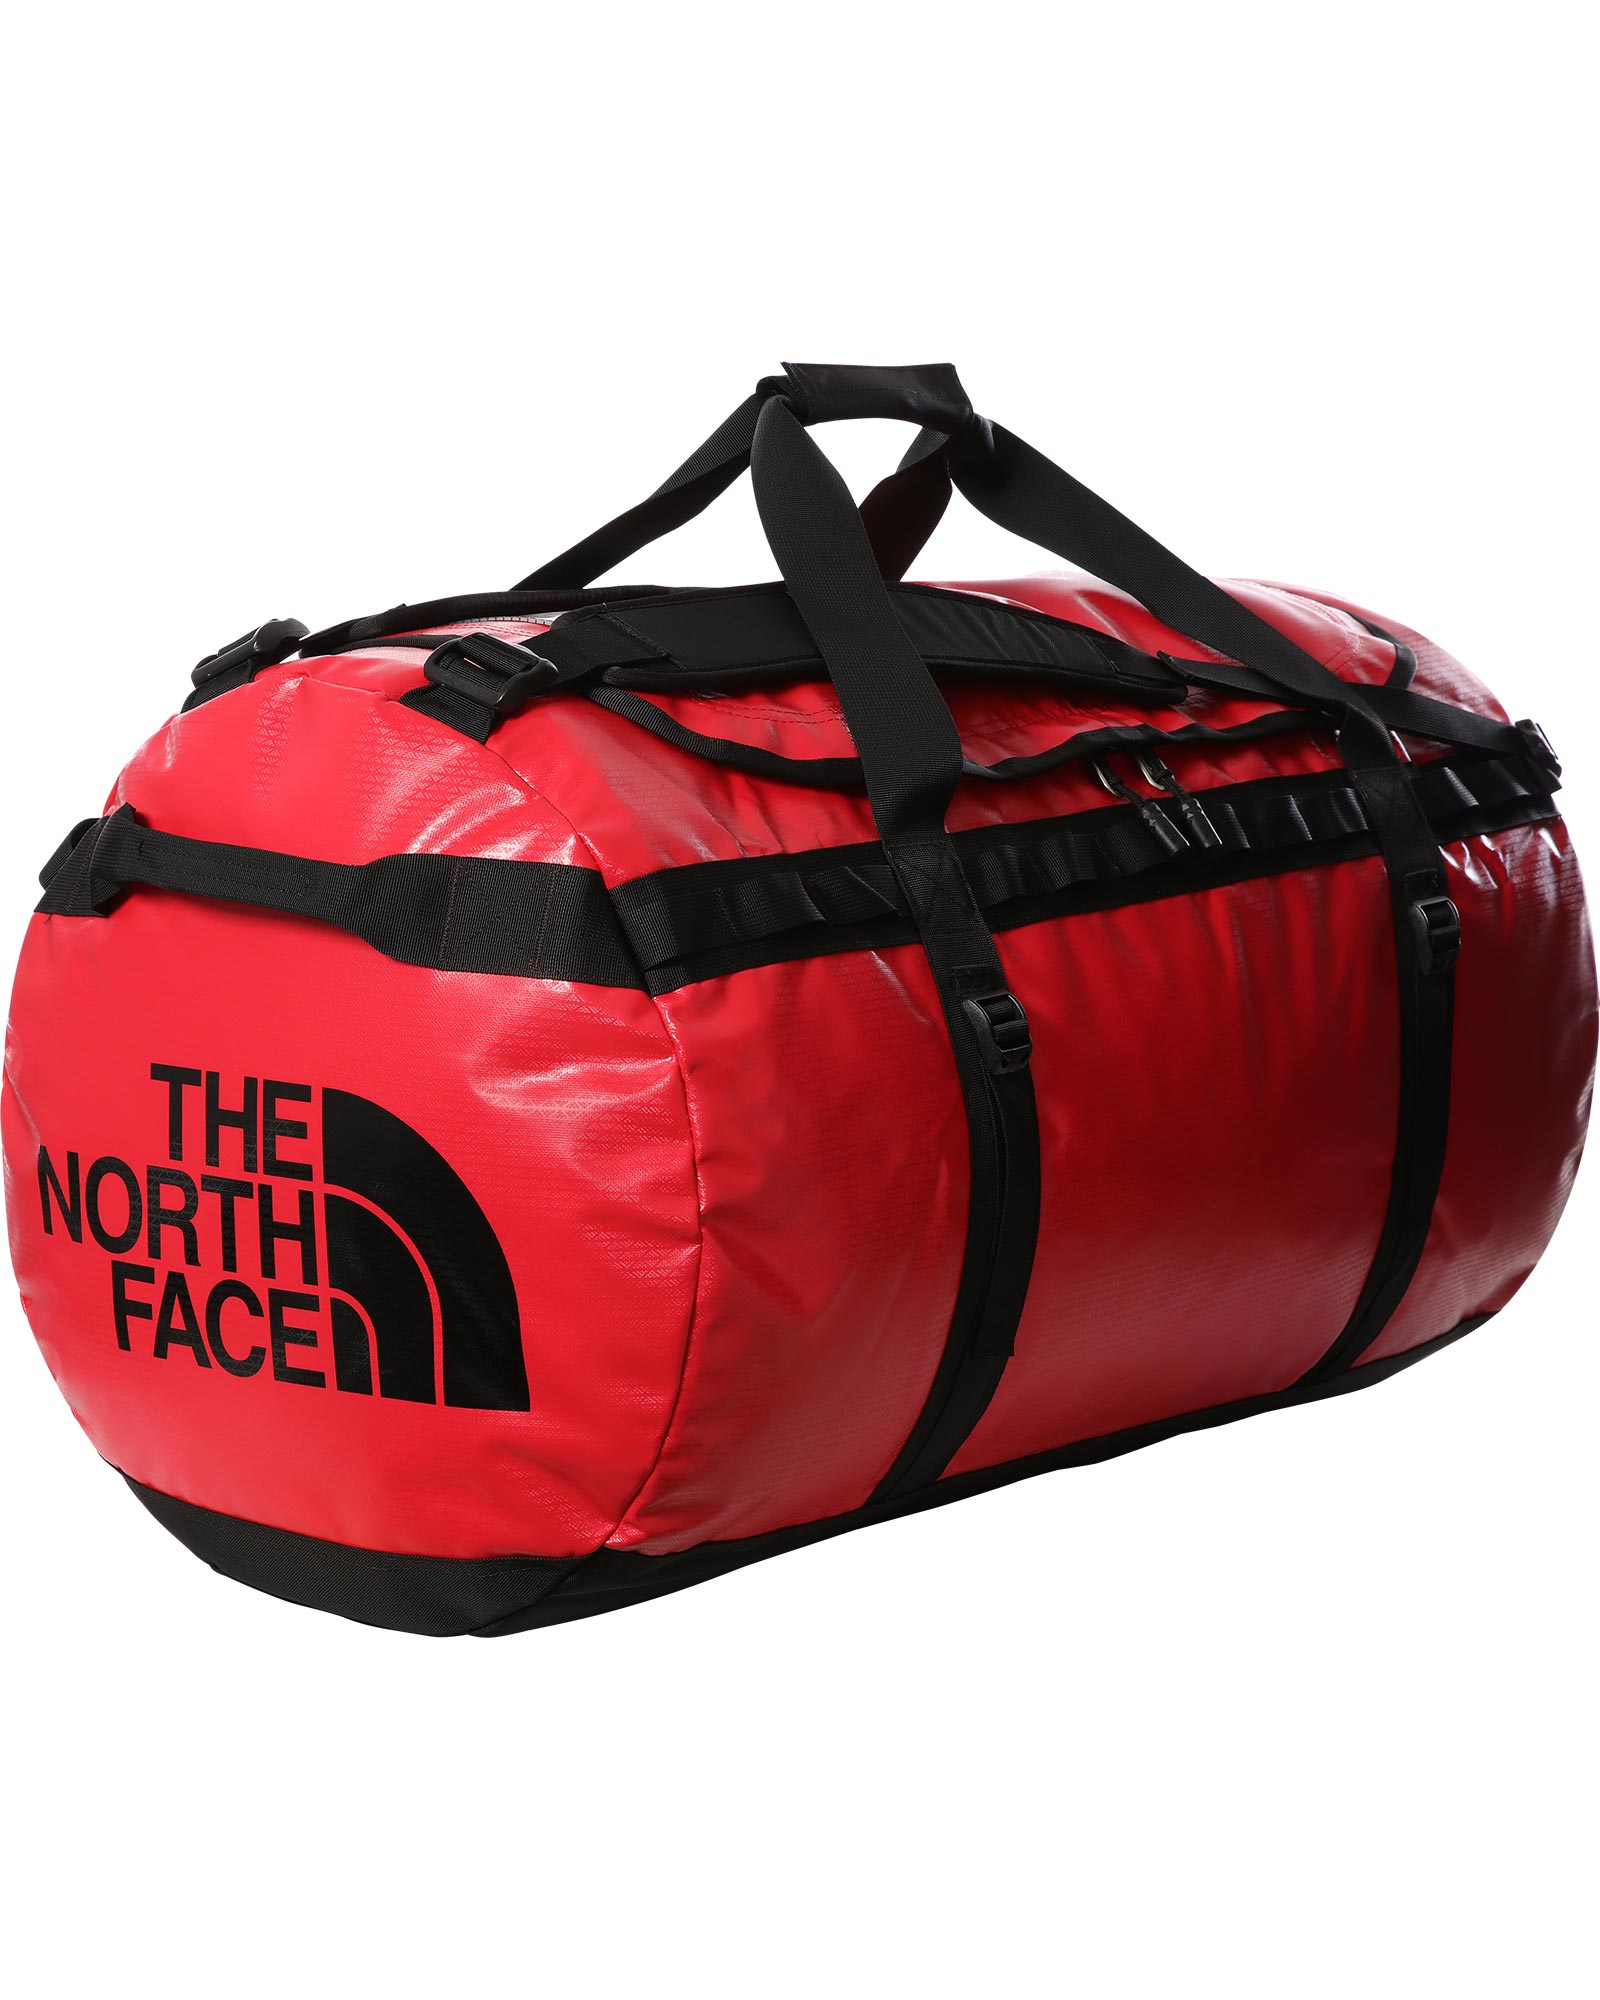 The North Face Base Camp Duffel X-large 132l